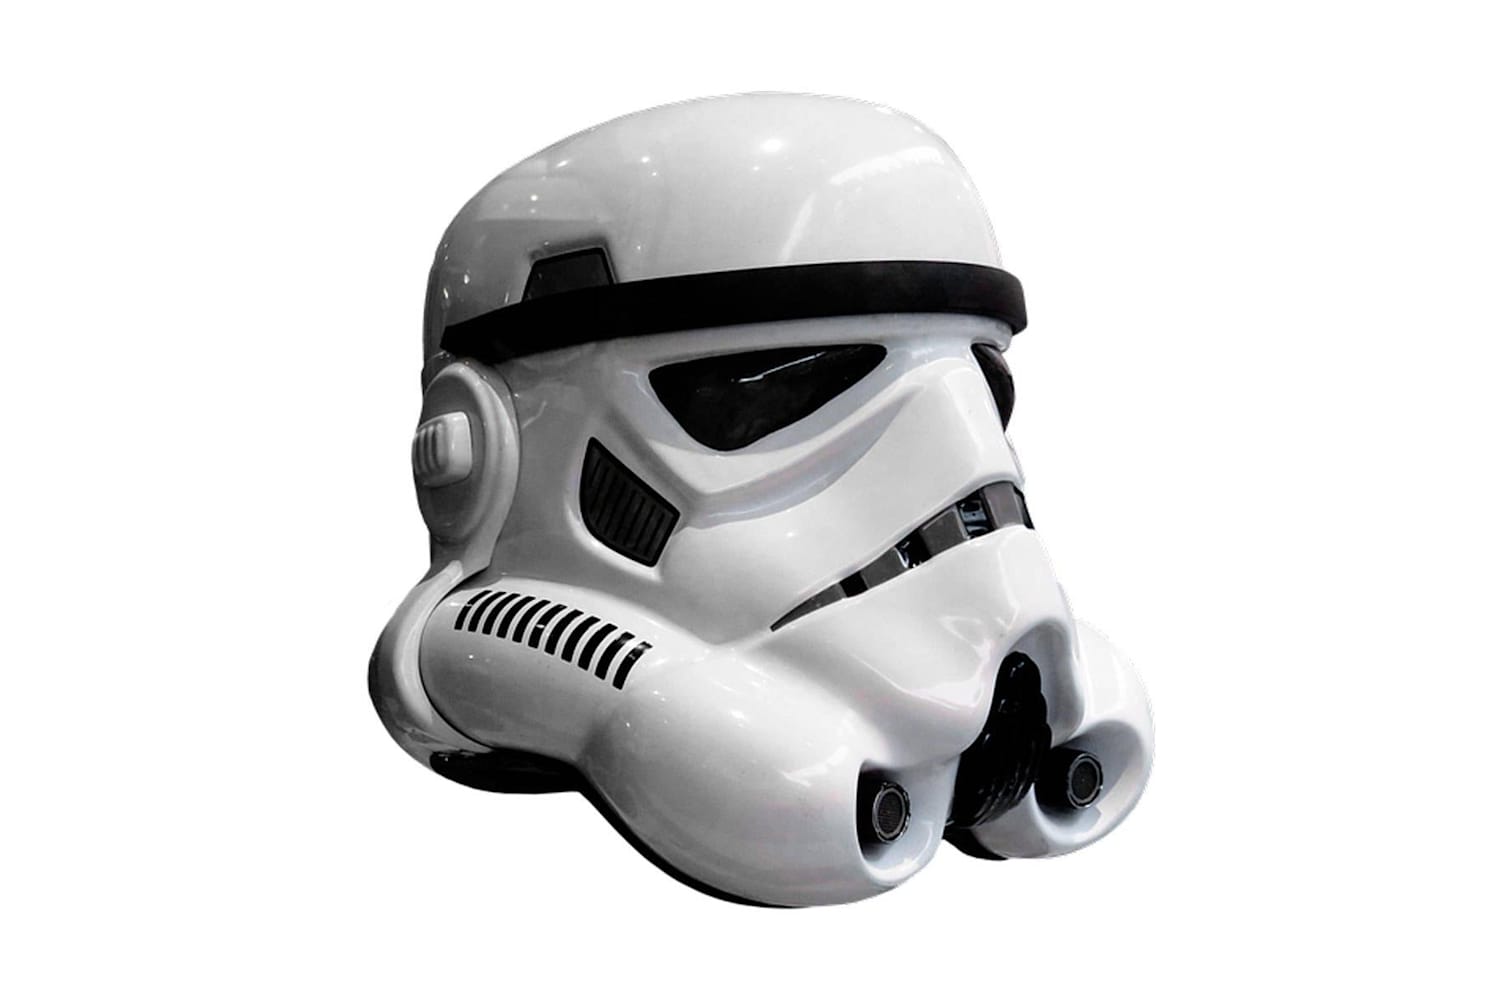 star wars most expensive collectibles